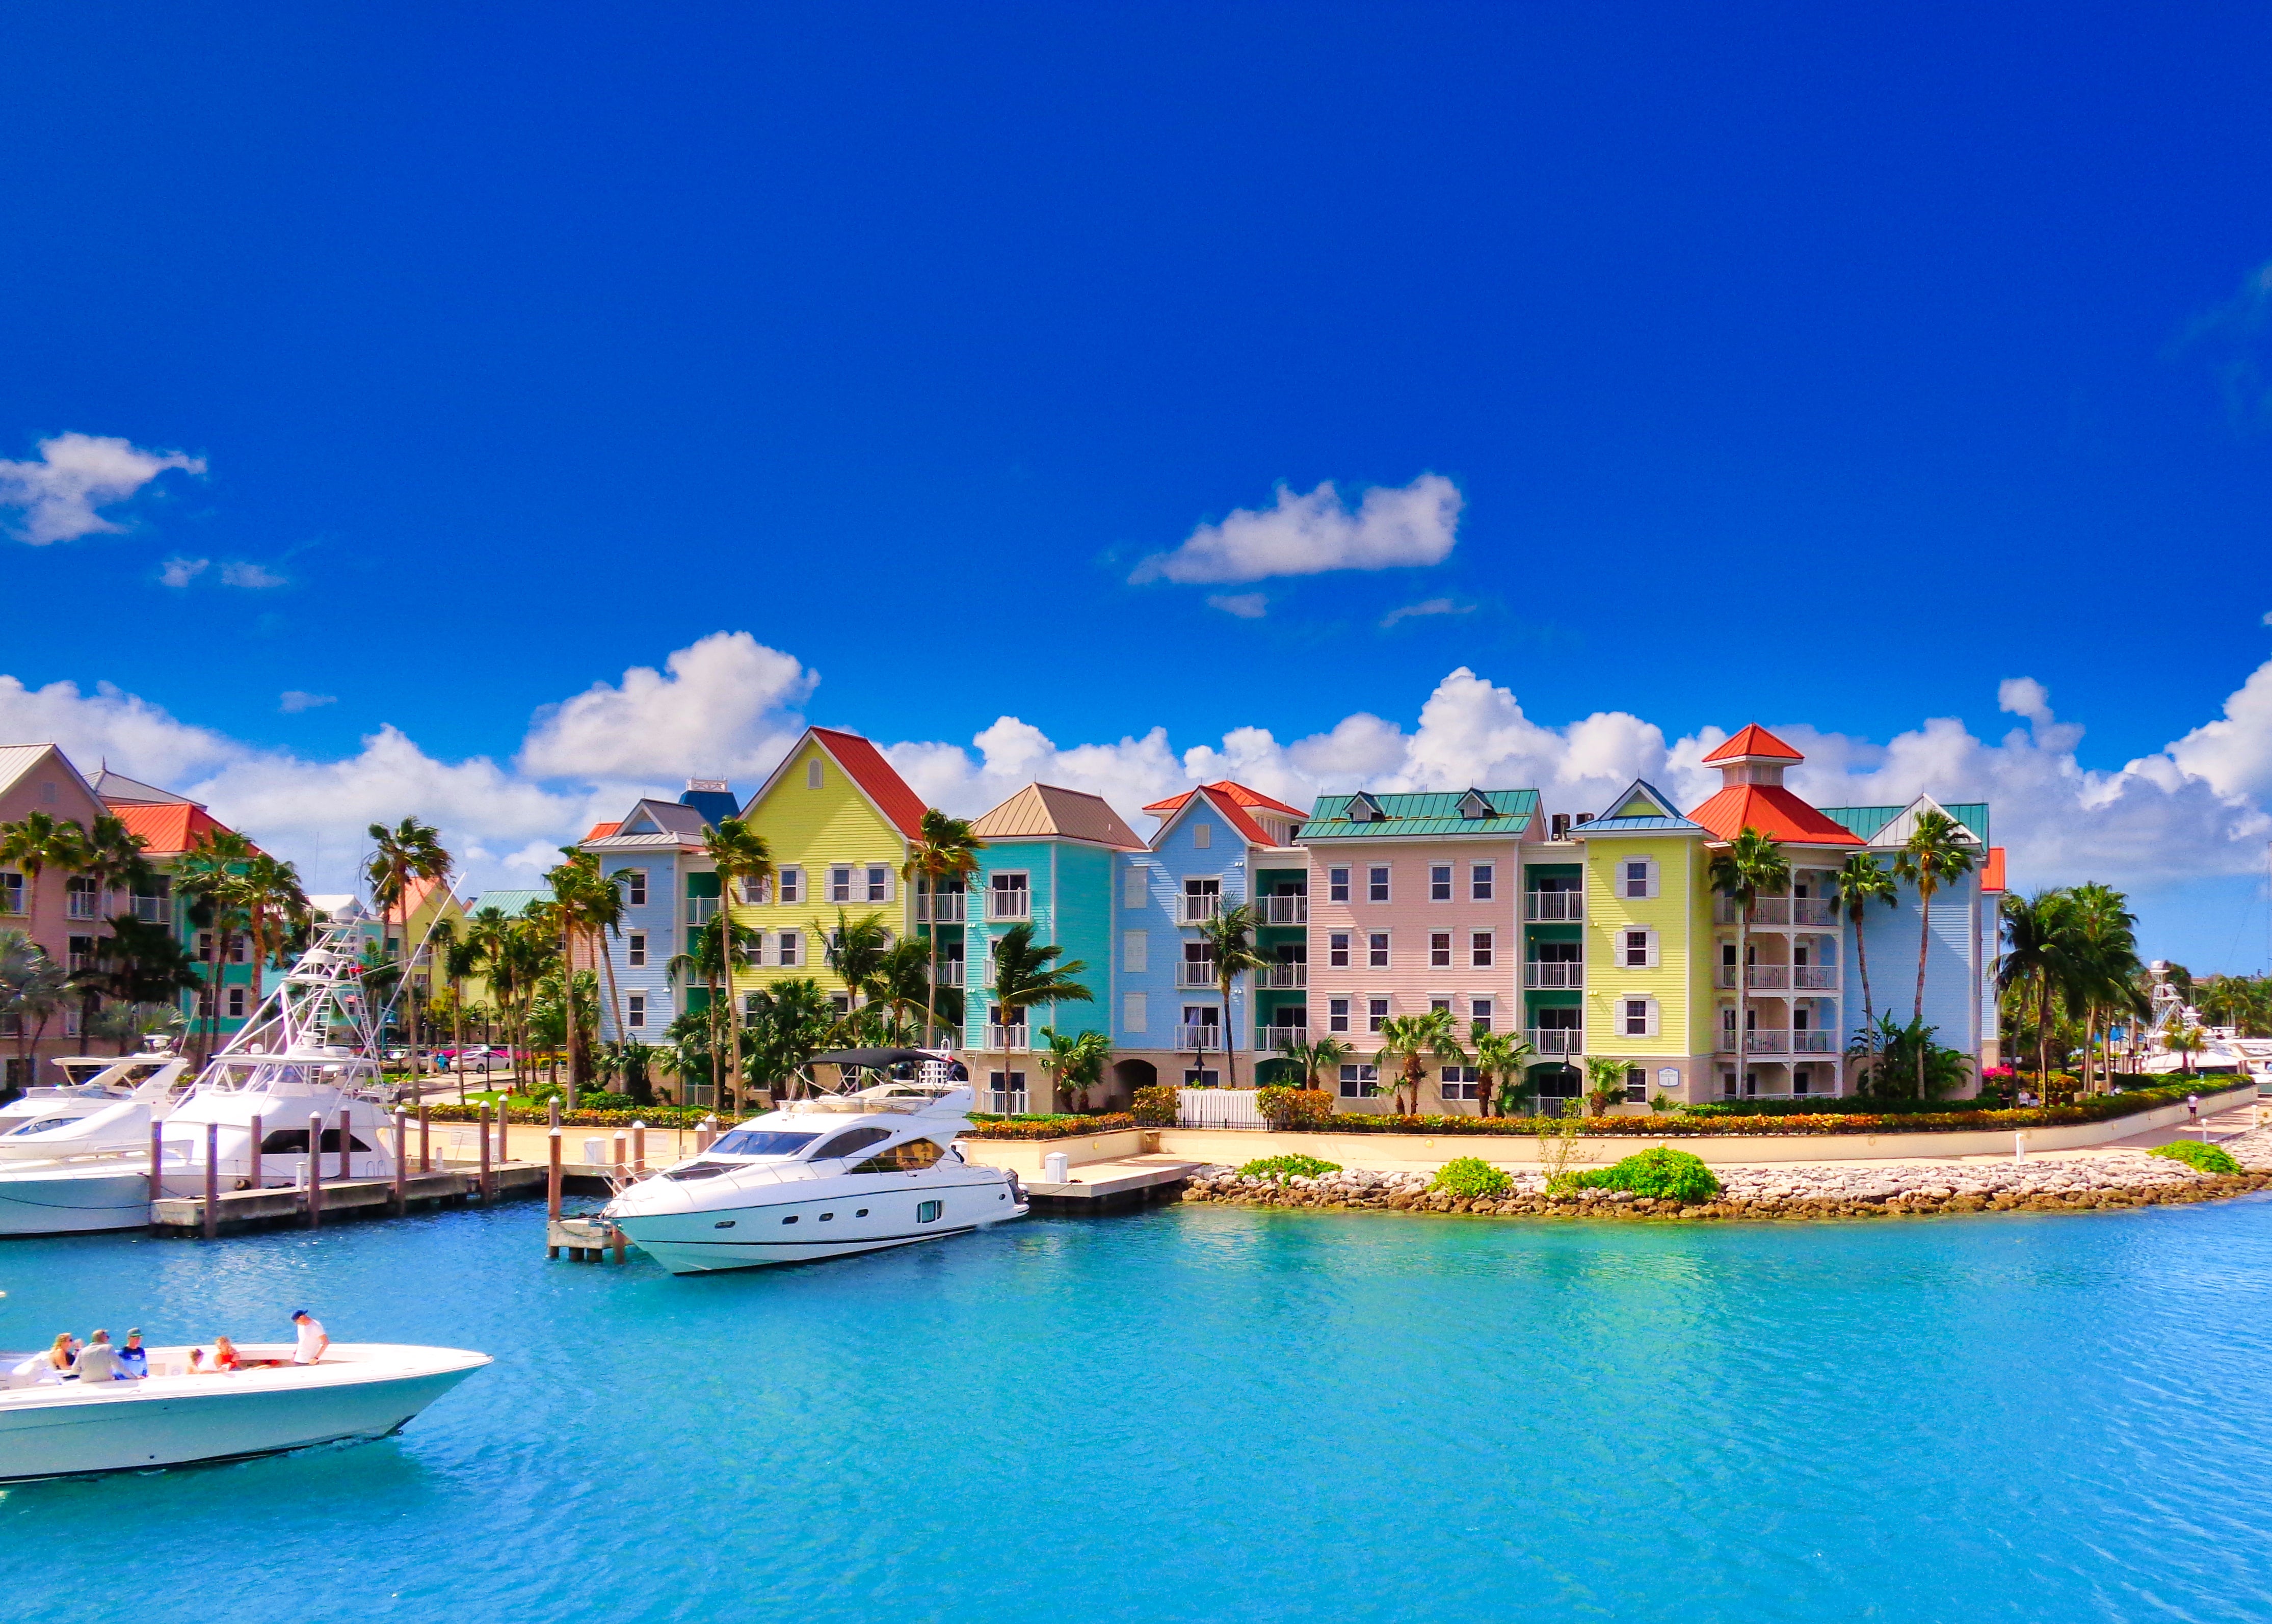 Year-round sunshine makes the Caribbean’s sandy swathes a go-to for a winter holiday